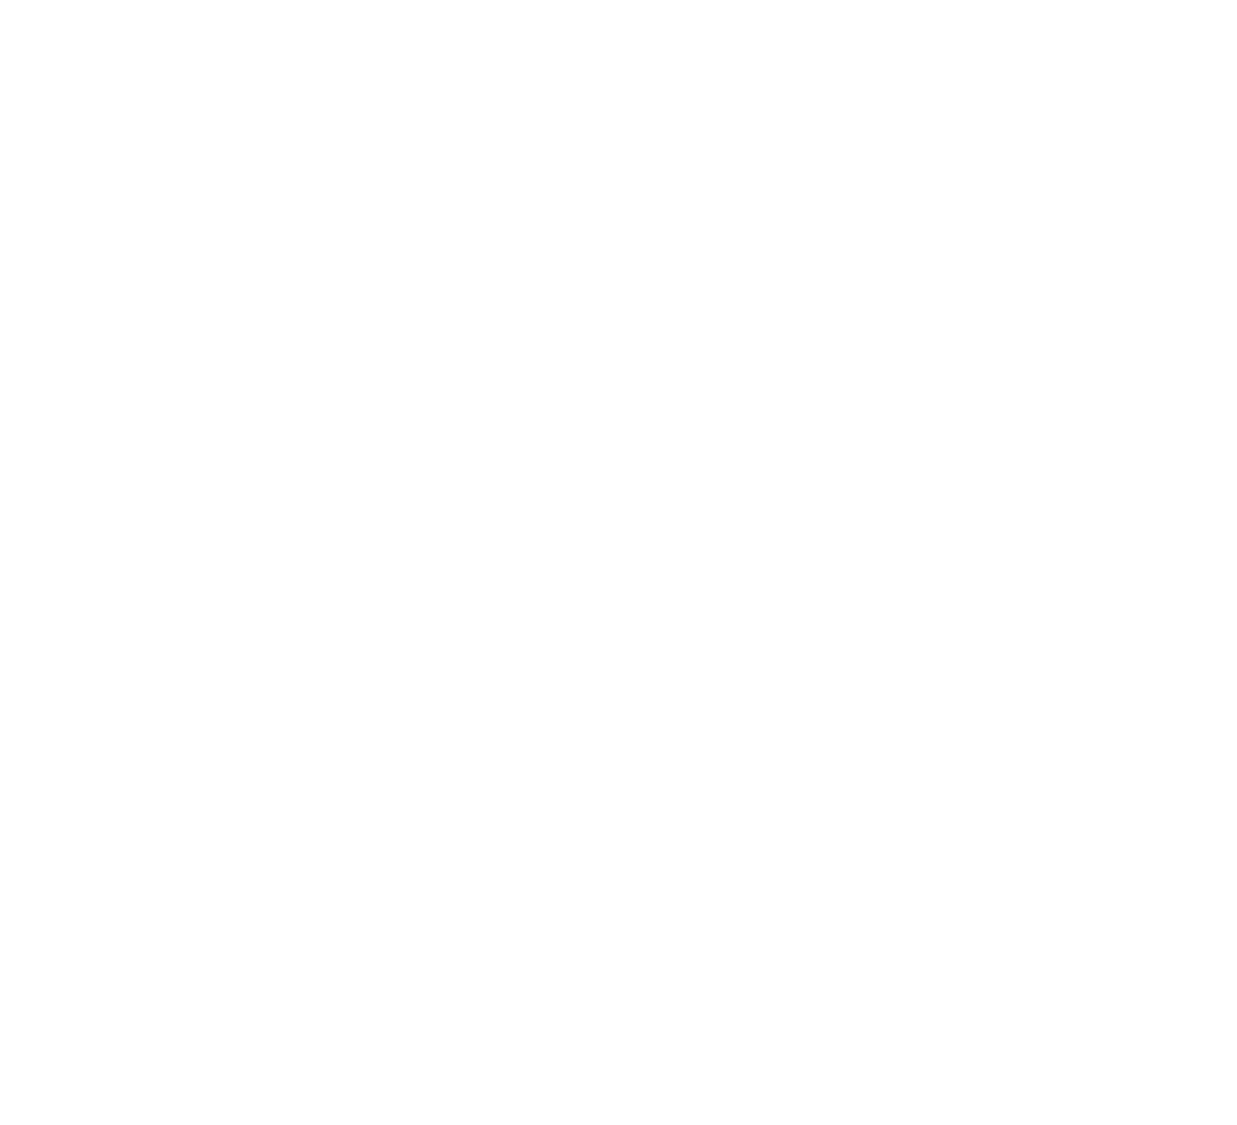 MINDFUL MAKERS